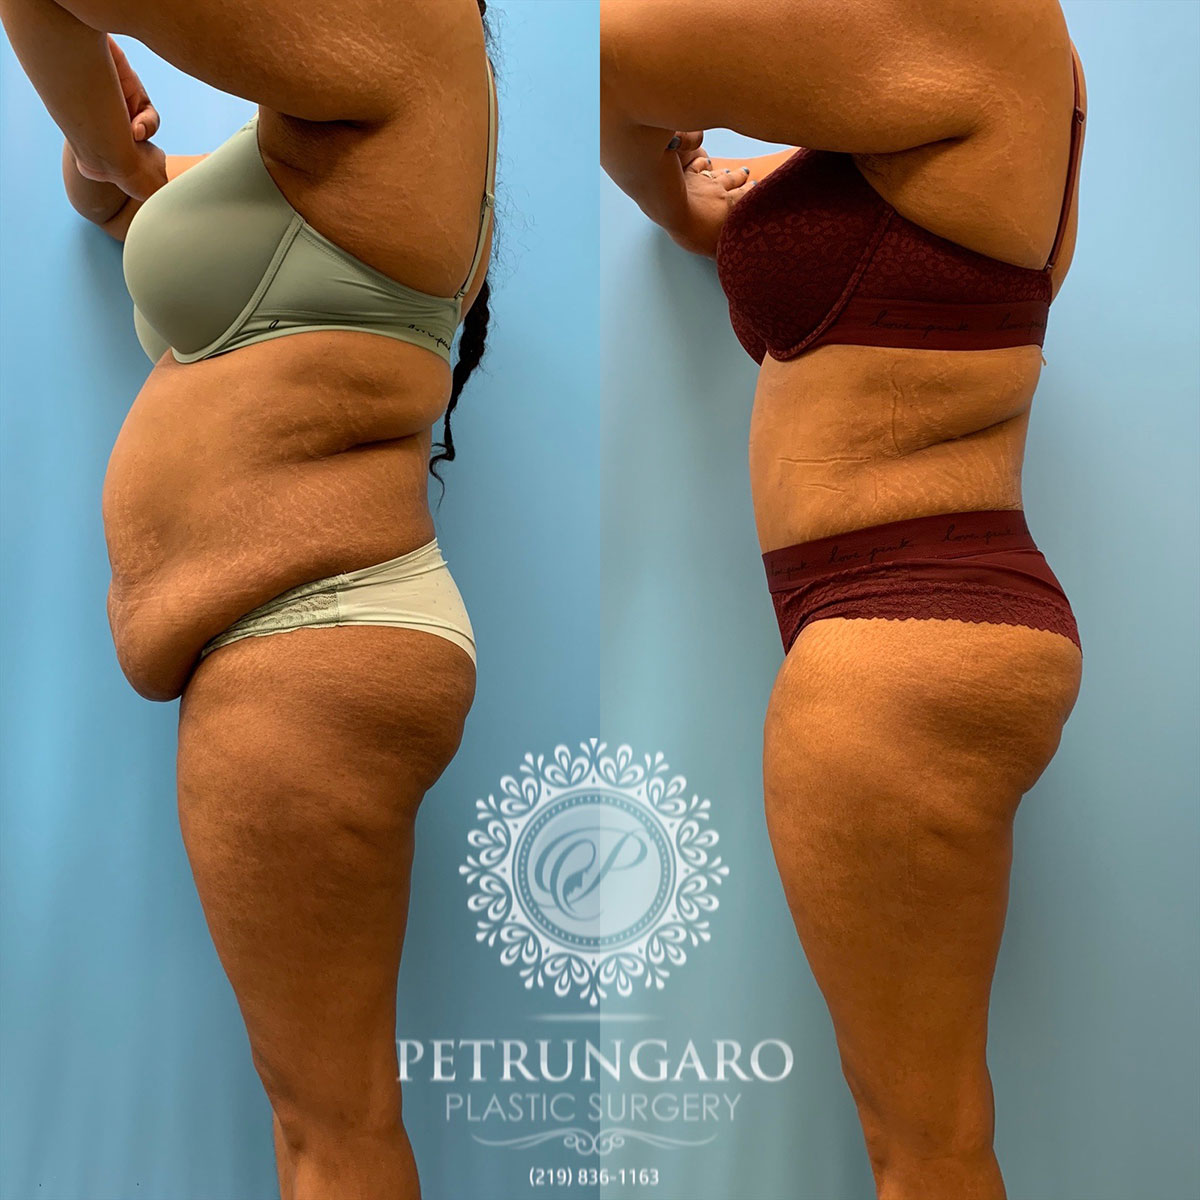 37 year old woman 3 months after tummy tuck with Lipo 360-2